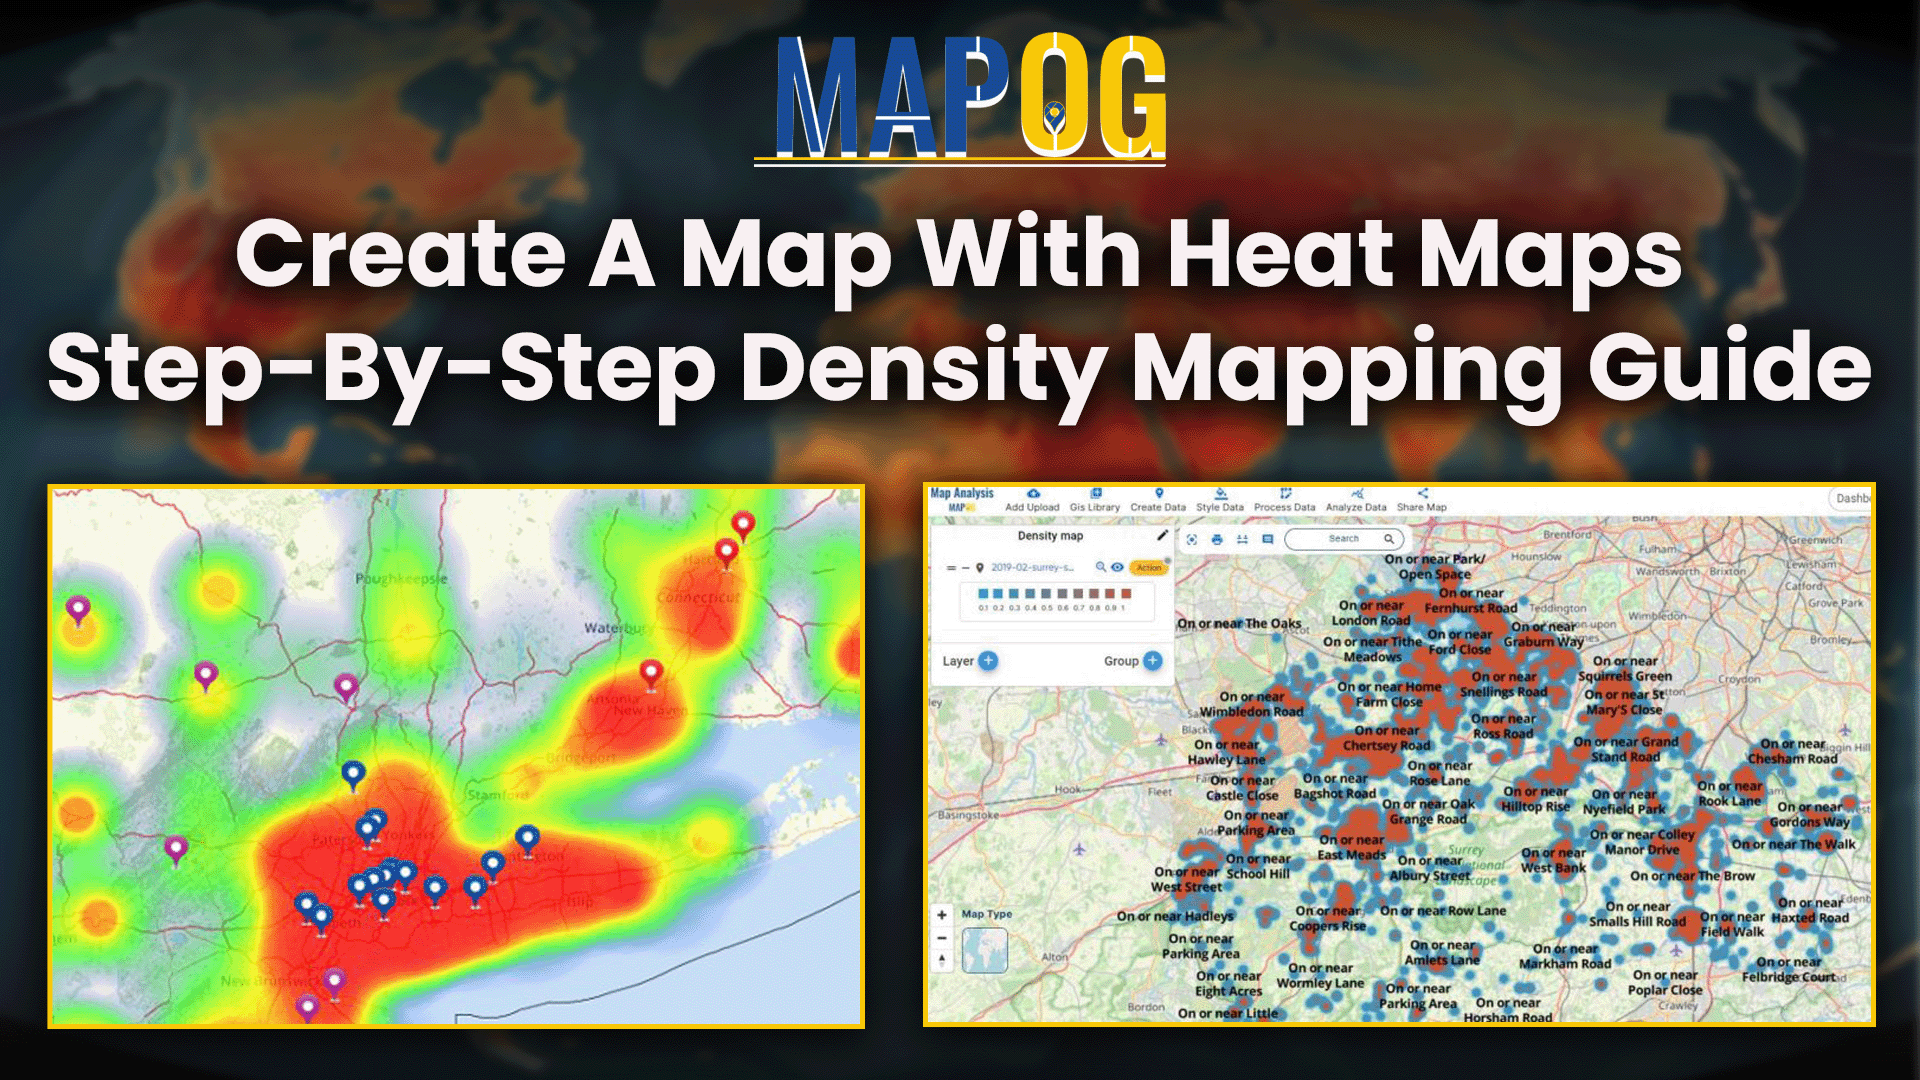 Create a Map with Heat Maps: Step-by-Step Density Mapping Guide